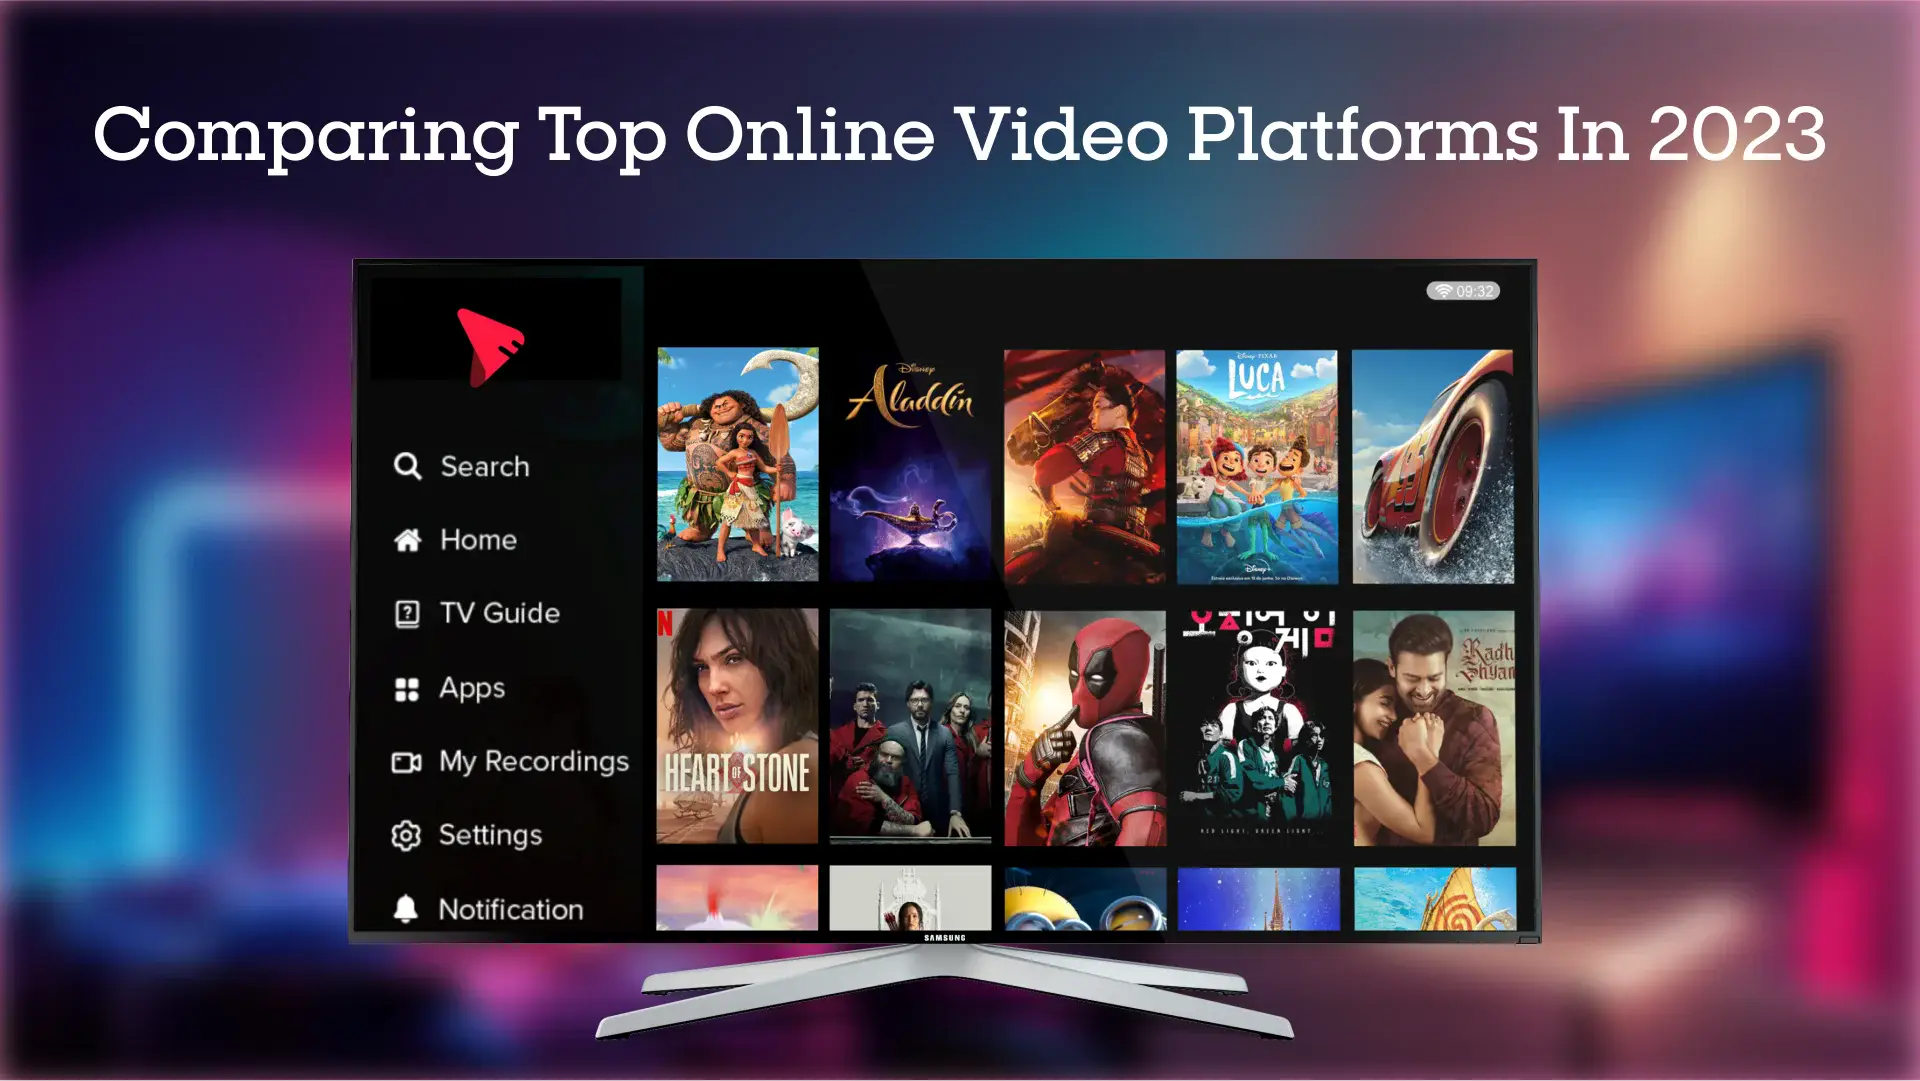 Top Online Video Platforms in 2023: Which One to Choose?